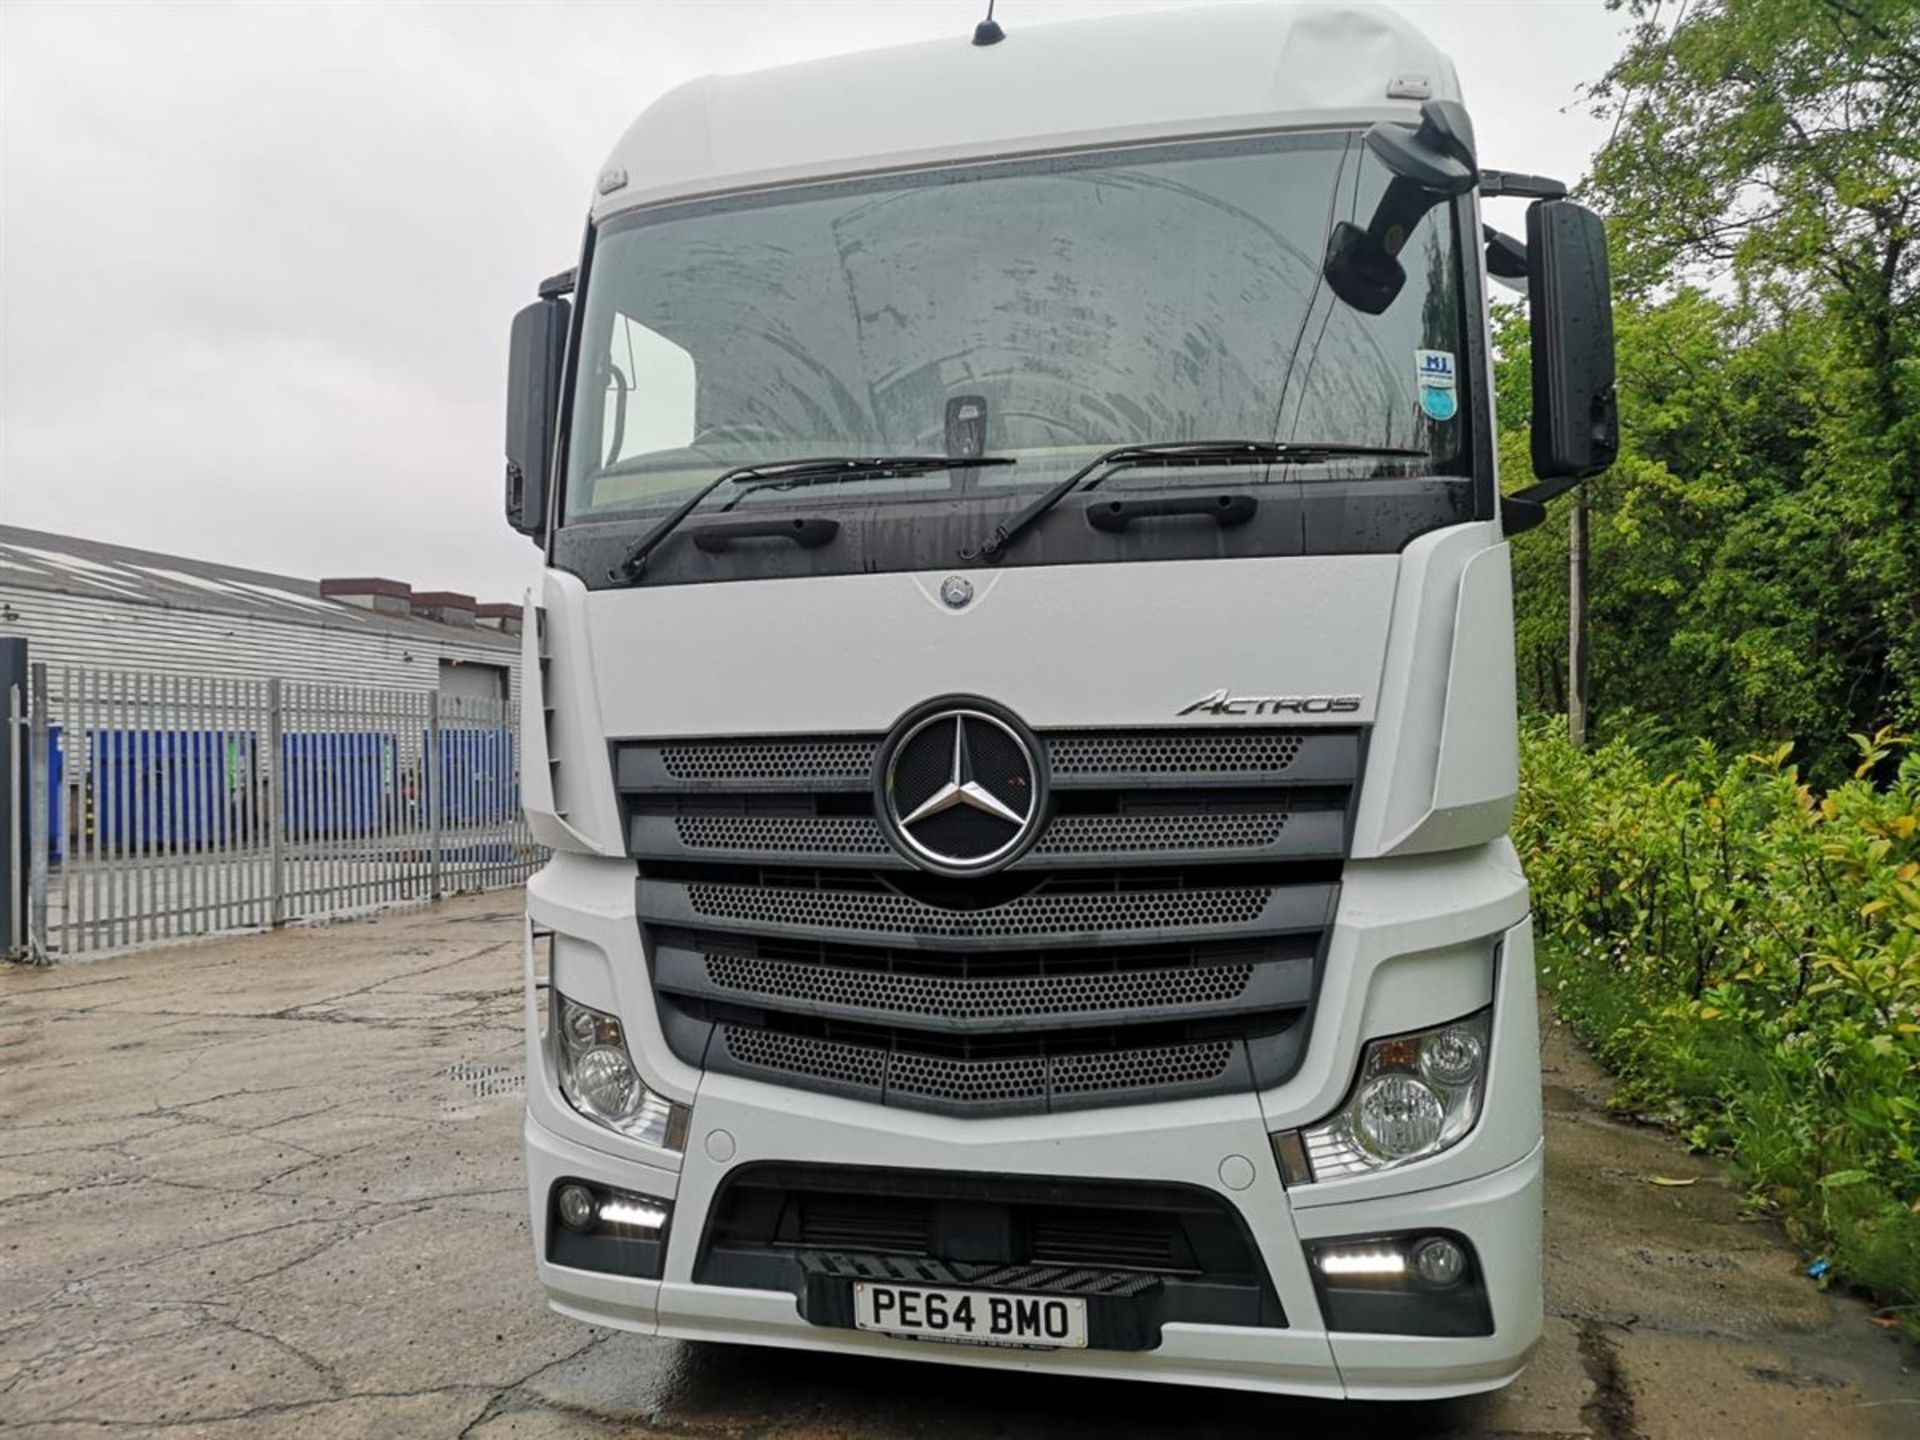 2014 Mercedes Actros 2545 Euro 6 Sleeper 4x2 Tractor Unit, [058762] Serial/Reg Number: PE64 BMO - Image 2 of 12